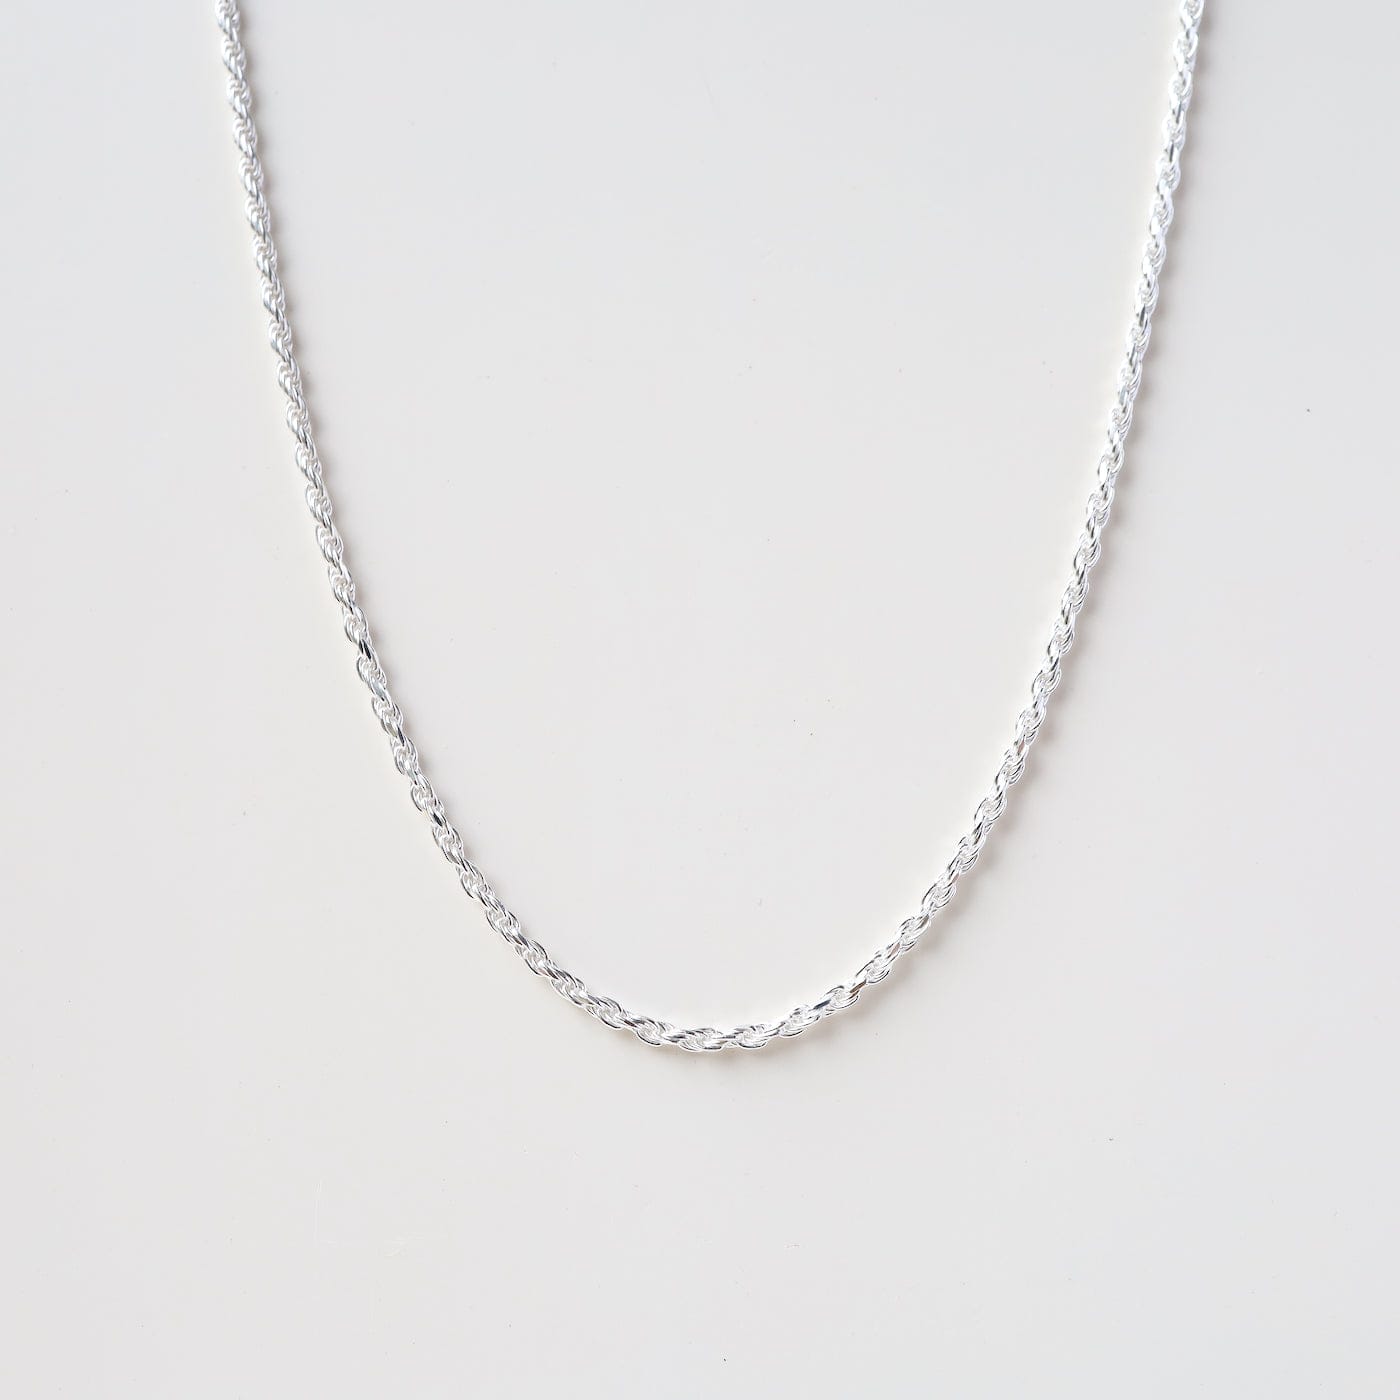 Men's Sterling Silver Foxtail Chain Necklace - Honest and Wise | NOVICA